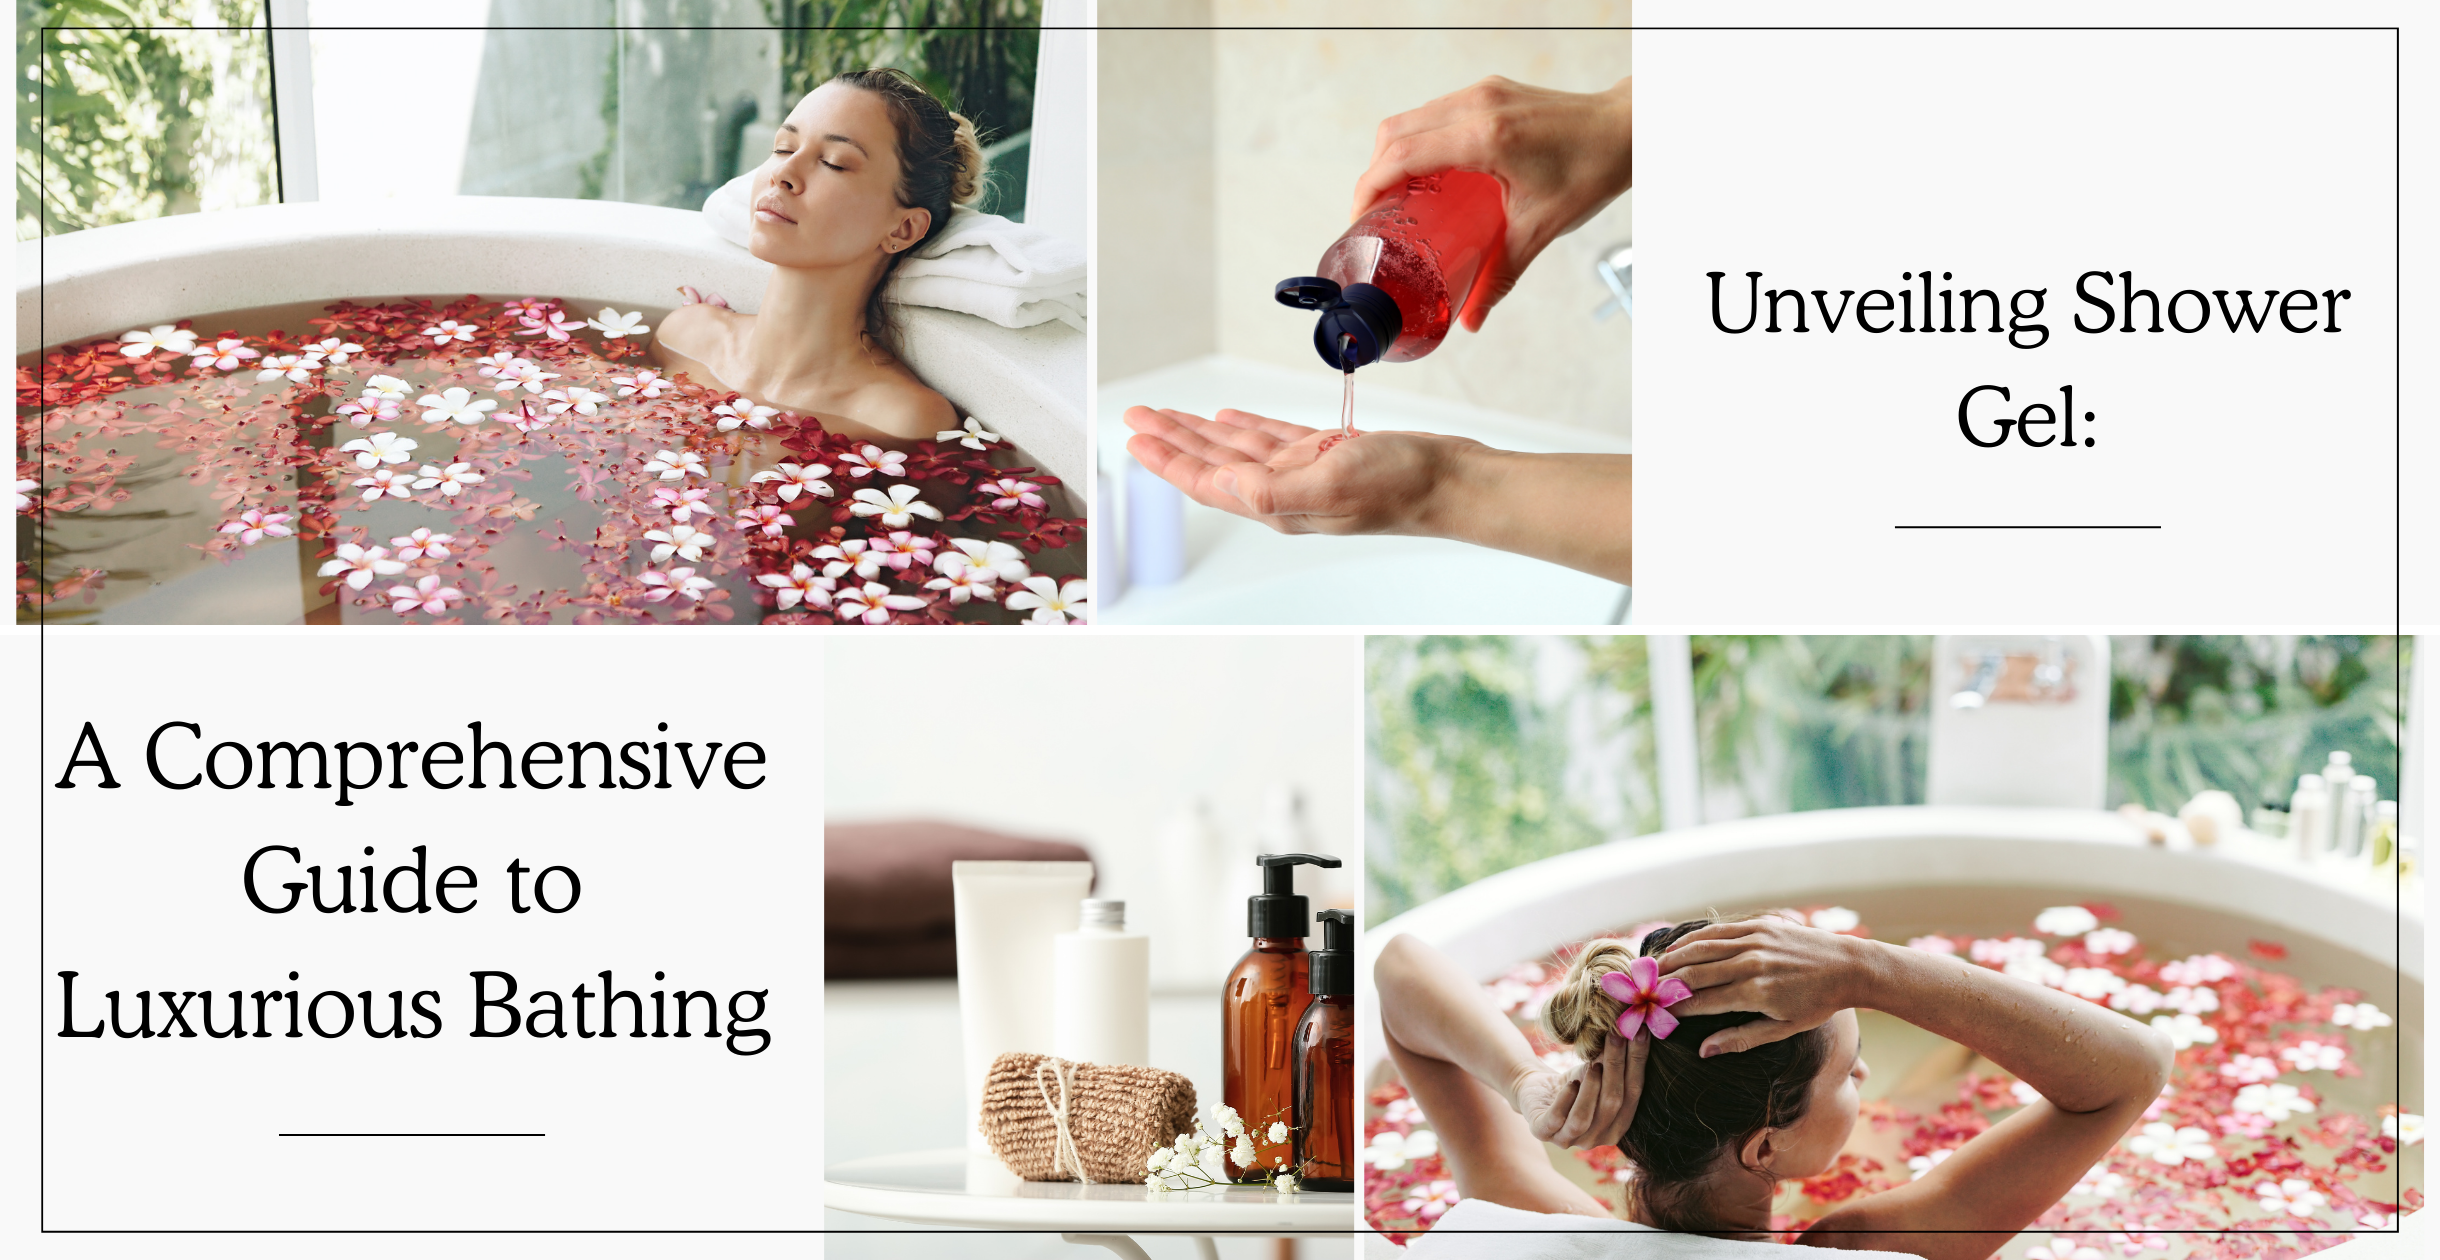 Unveiling Shower Gel: A Comprehensive Guide to Luxurious Bathing